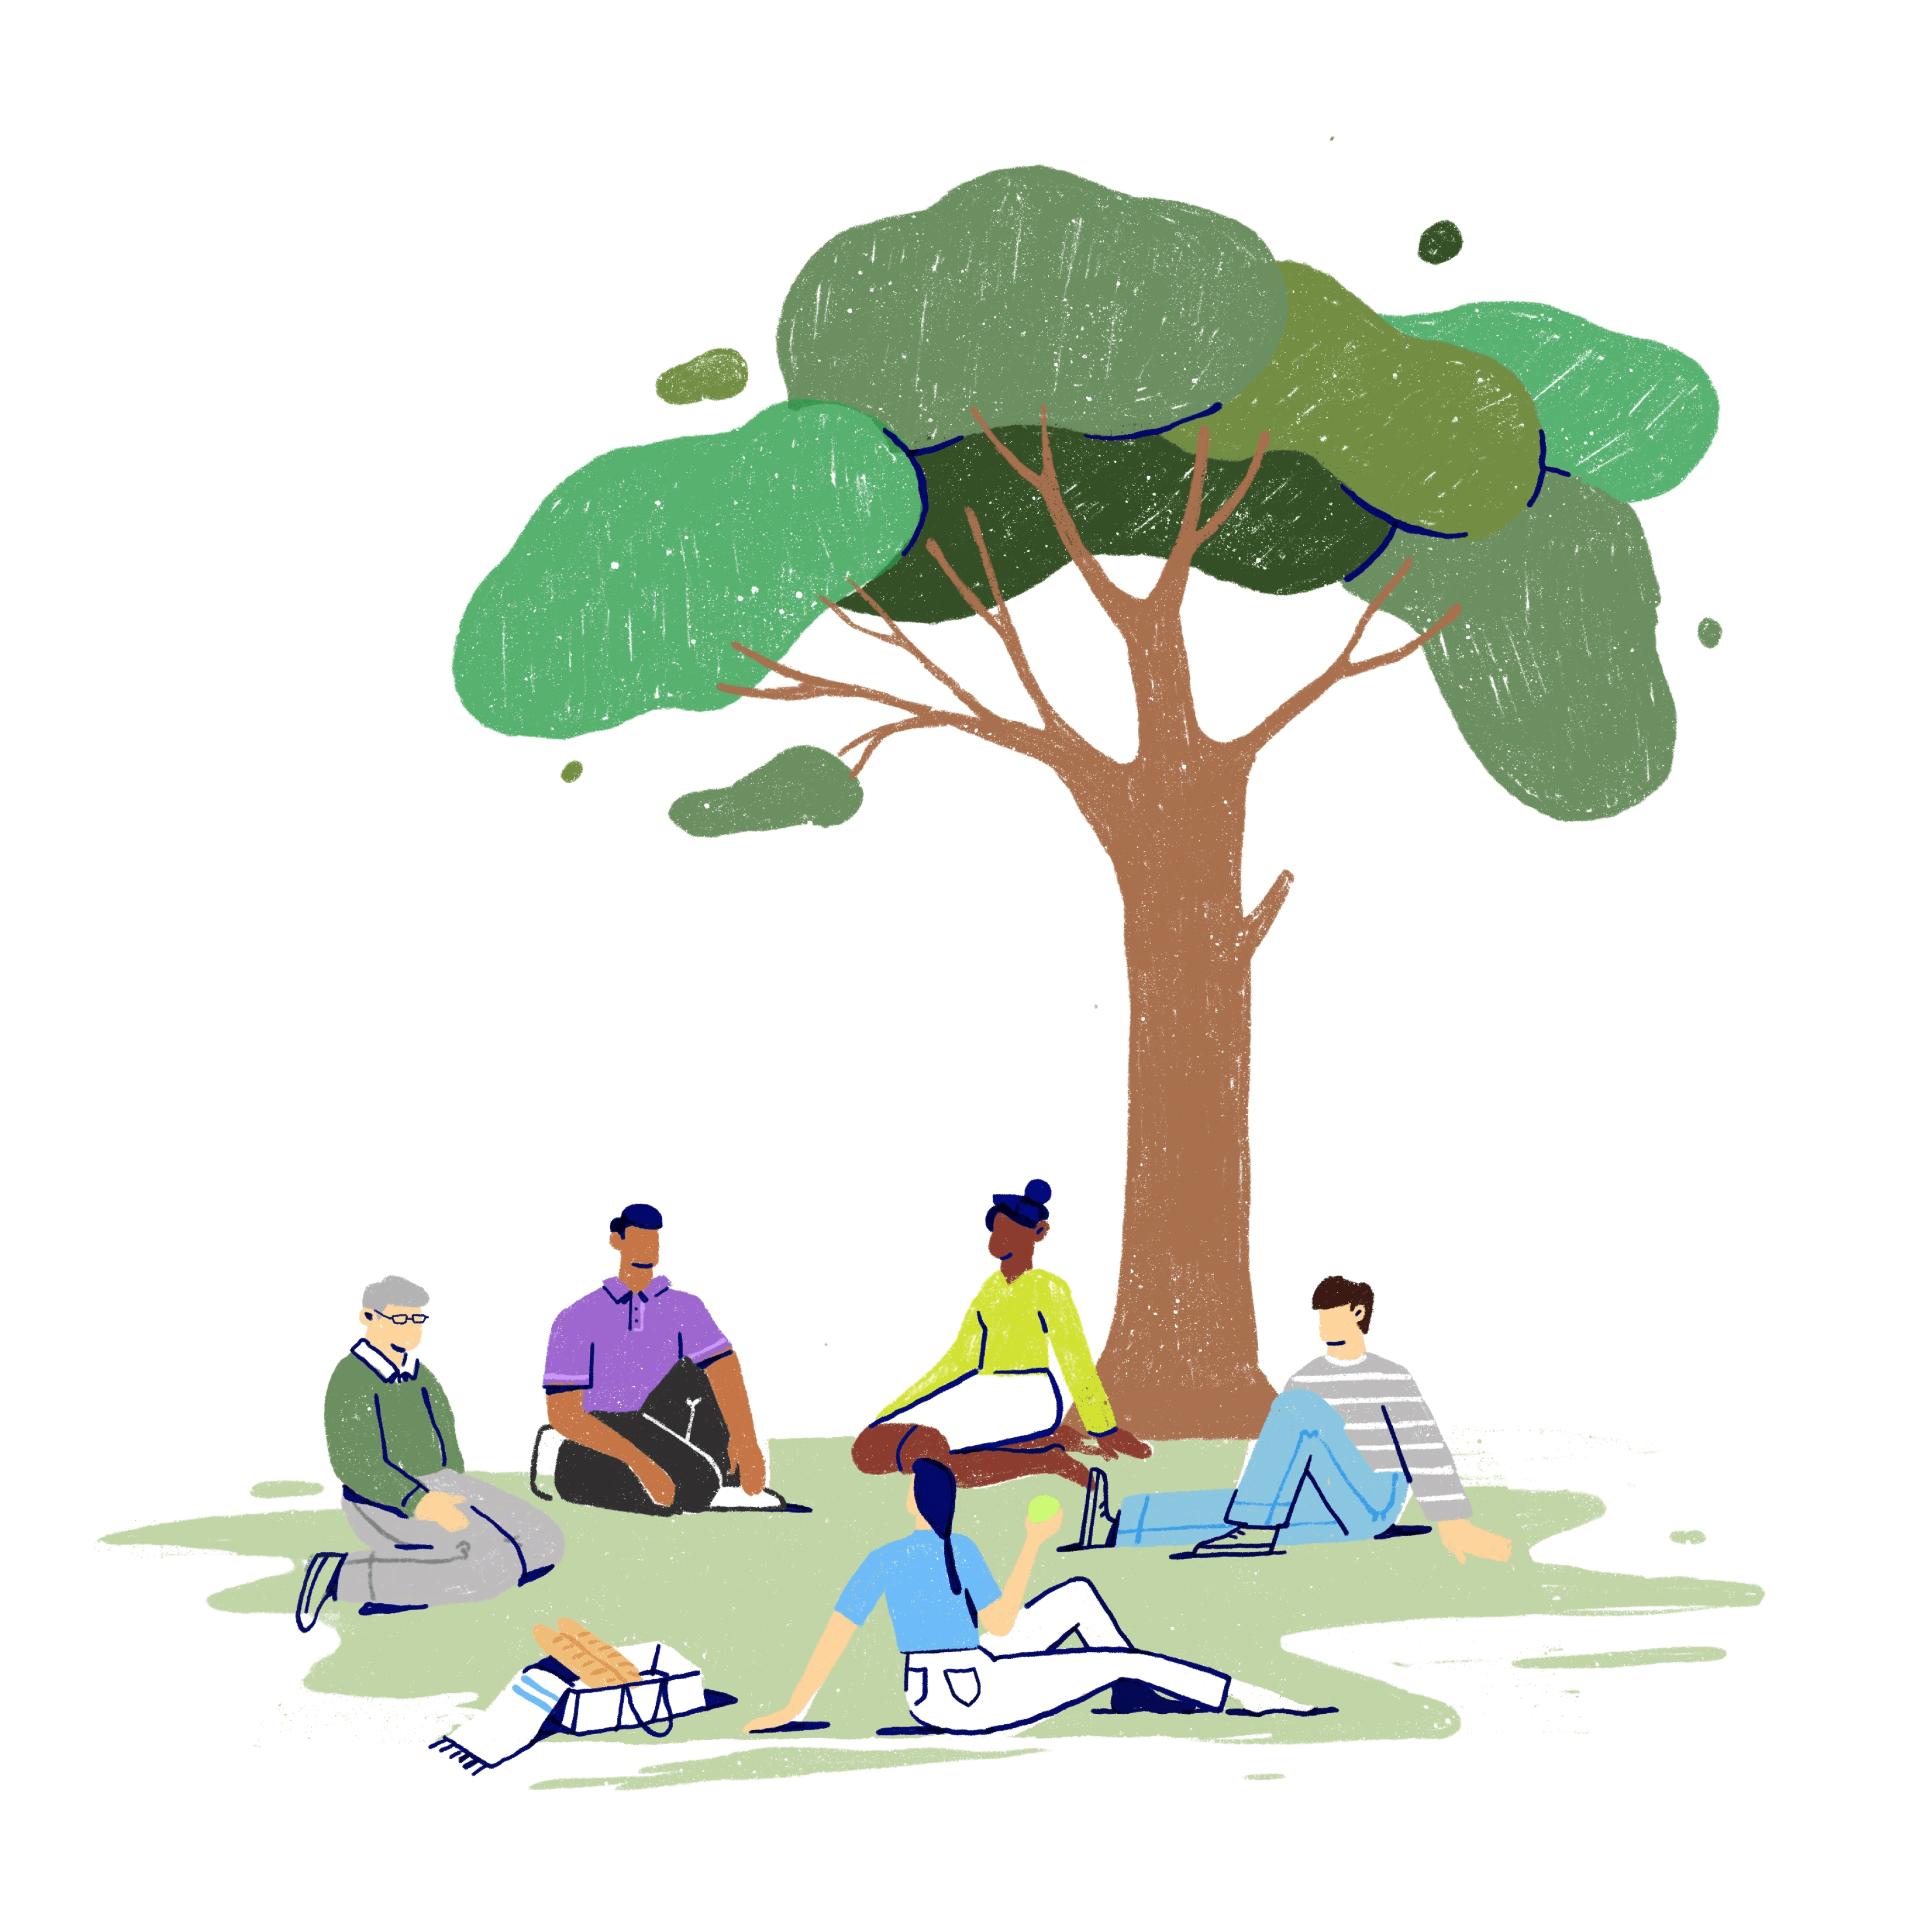 People sat in a group on the grass next to a tree